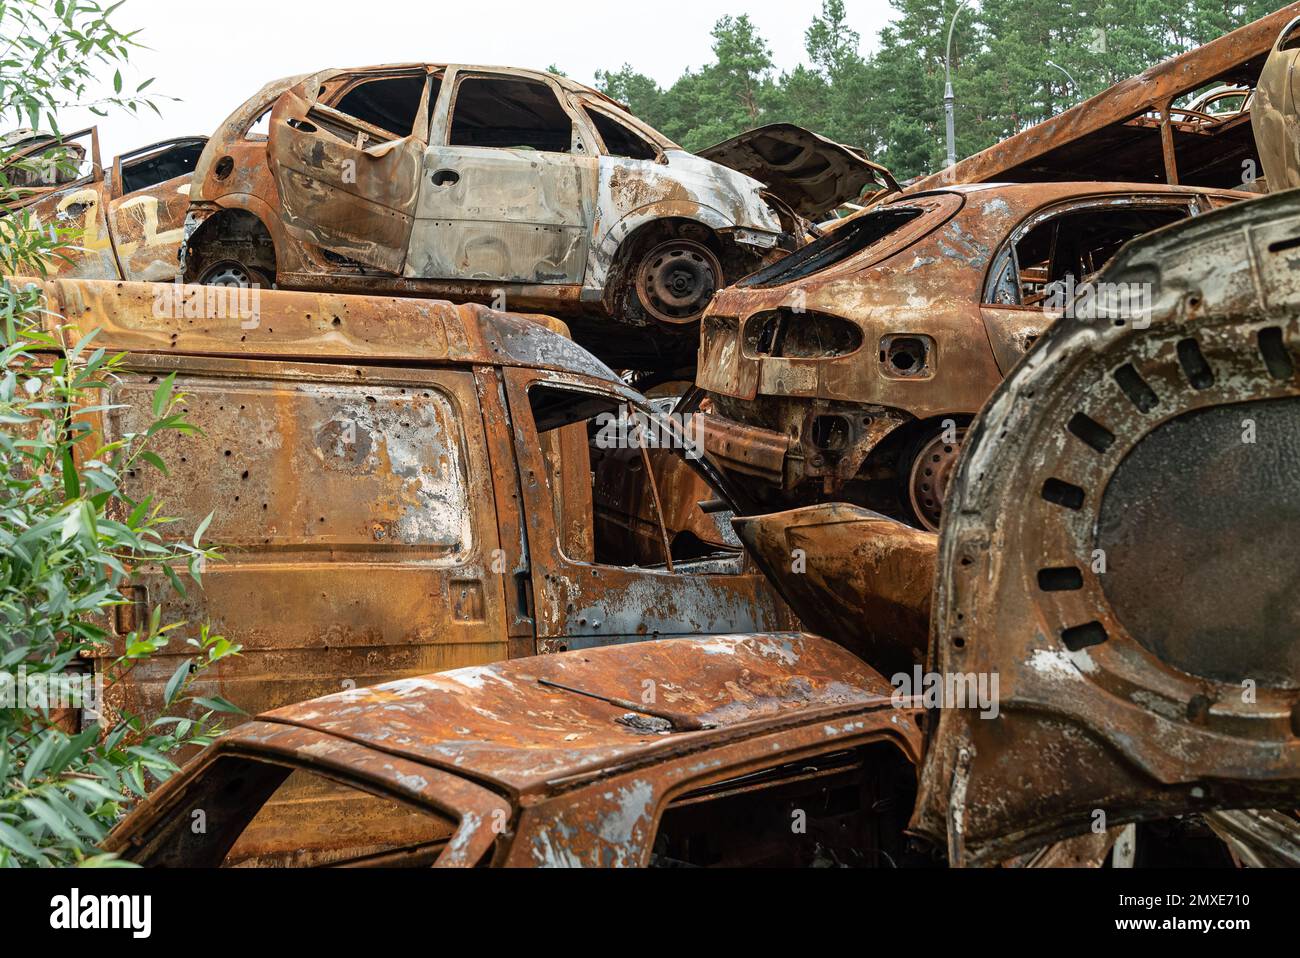 War in Ukraine: a dump of shot and burned cars in Irpin, Bucha district Stock Photo